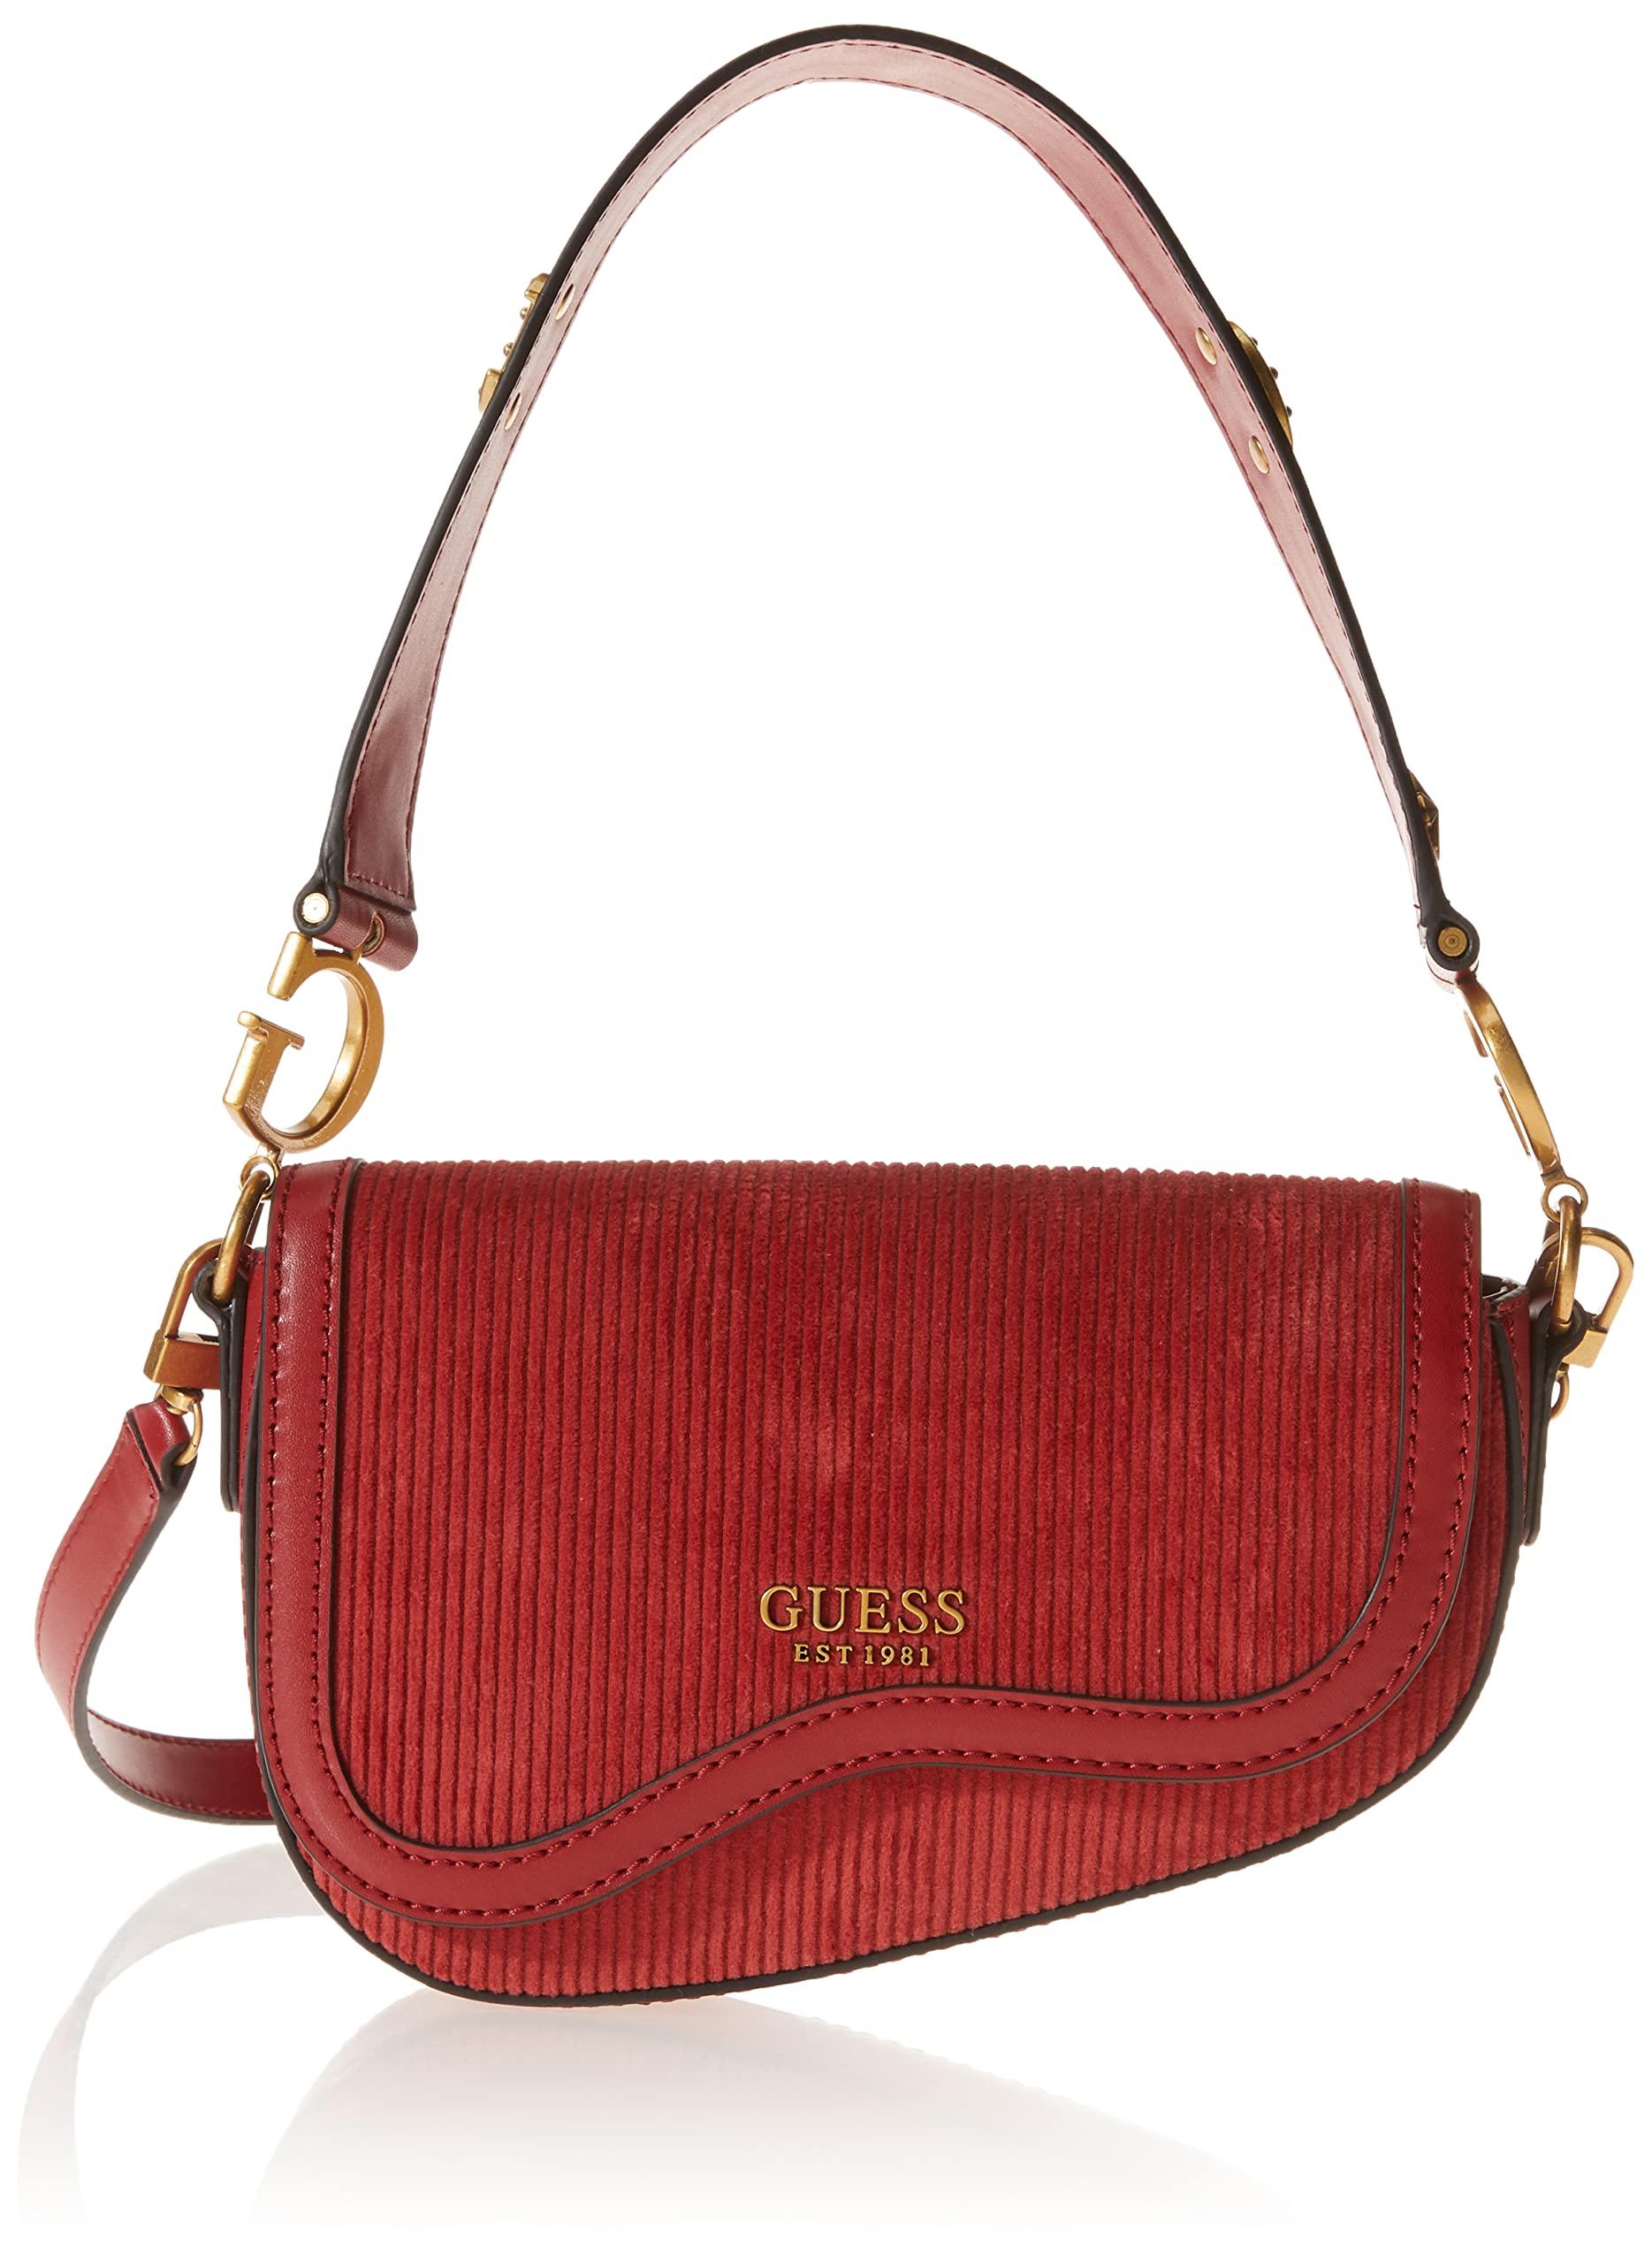 Guess G Dream Flap Shoulder Bag in Rust (Red) - Save 17% - Lyst